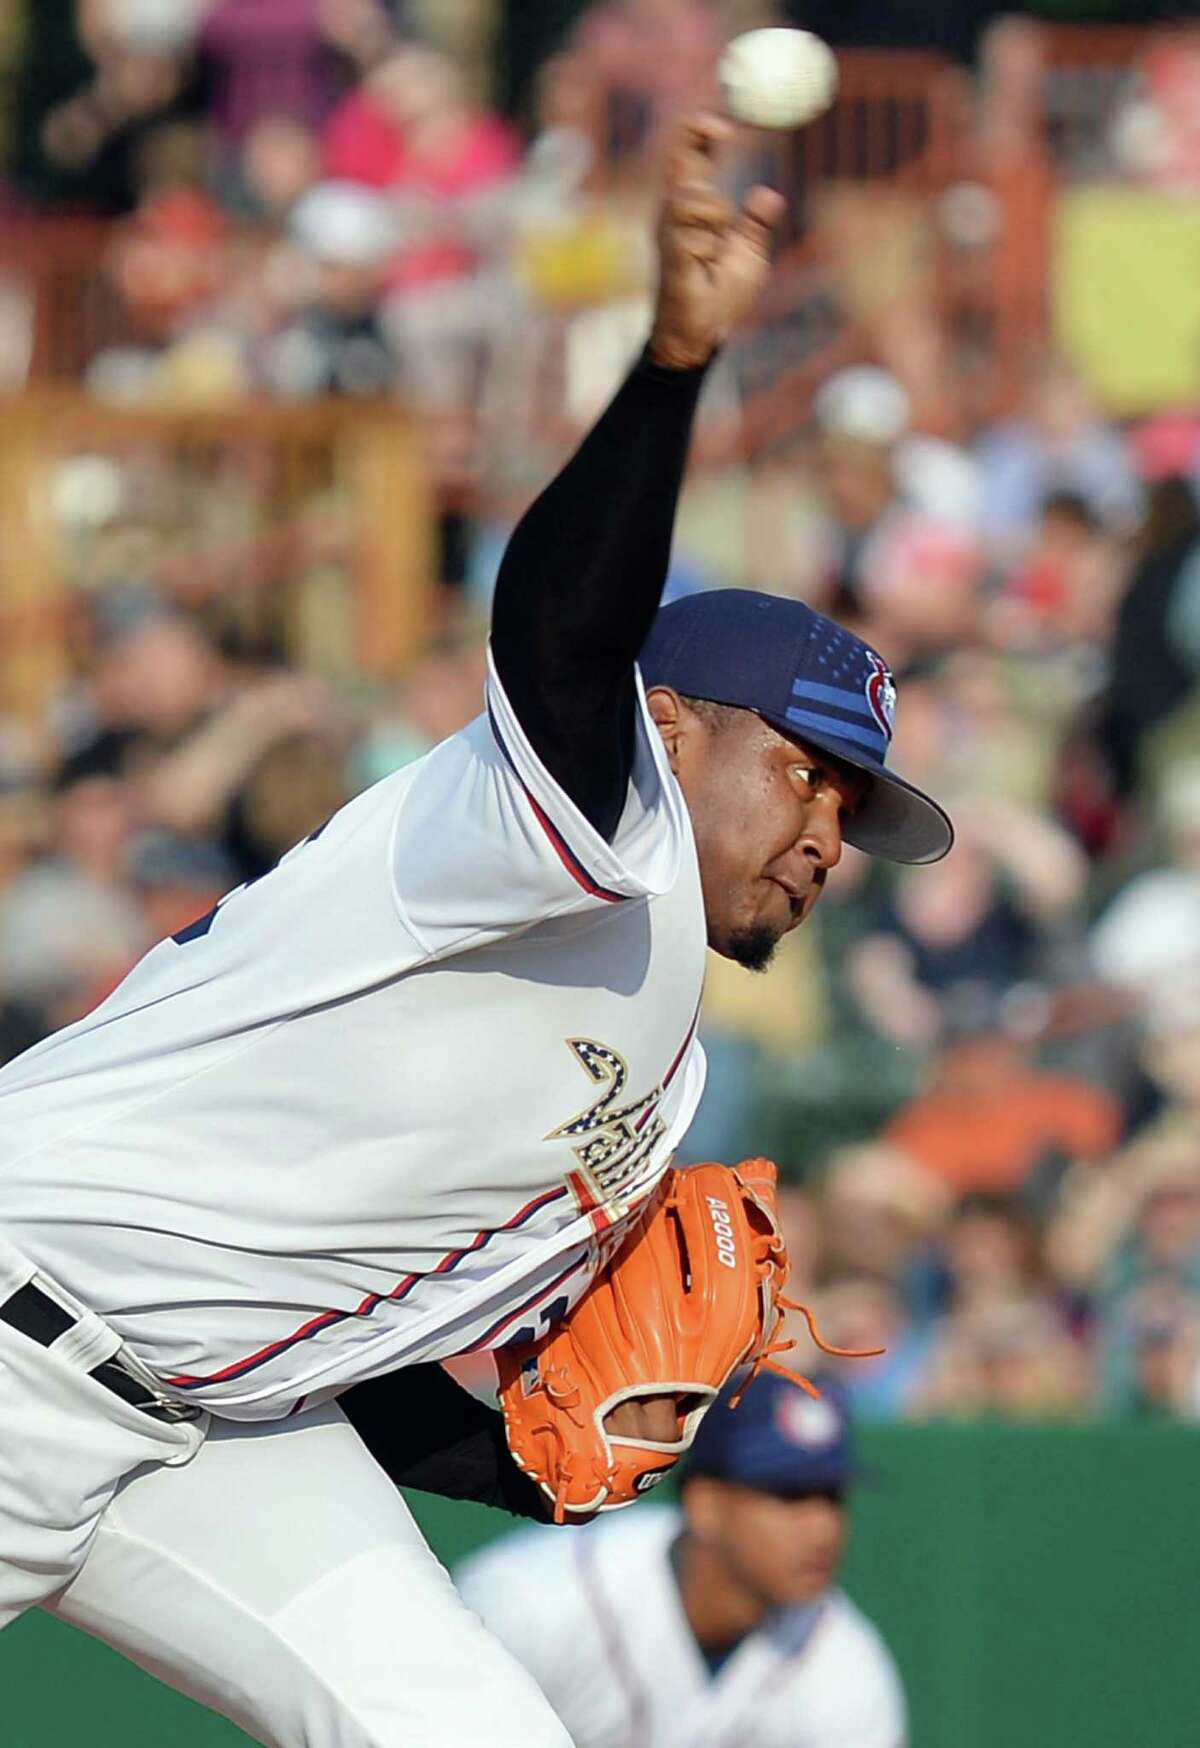 Tri-City ValleyCats starting pitcher Rogelio Armenteros in action against the Lowell Spinners Saturday July 4, 2015 at Joe Bruno Stadium in Troy, NY. (John Carl D'Annibale / Times Union)